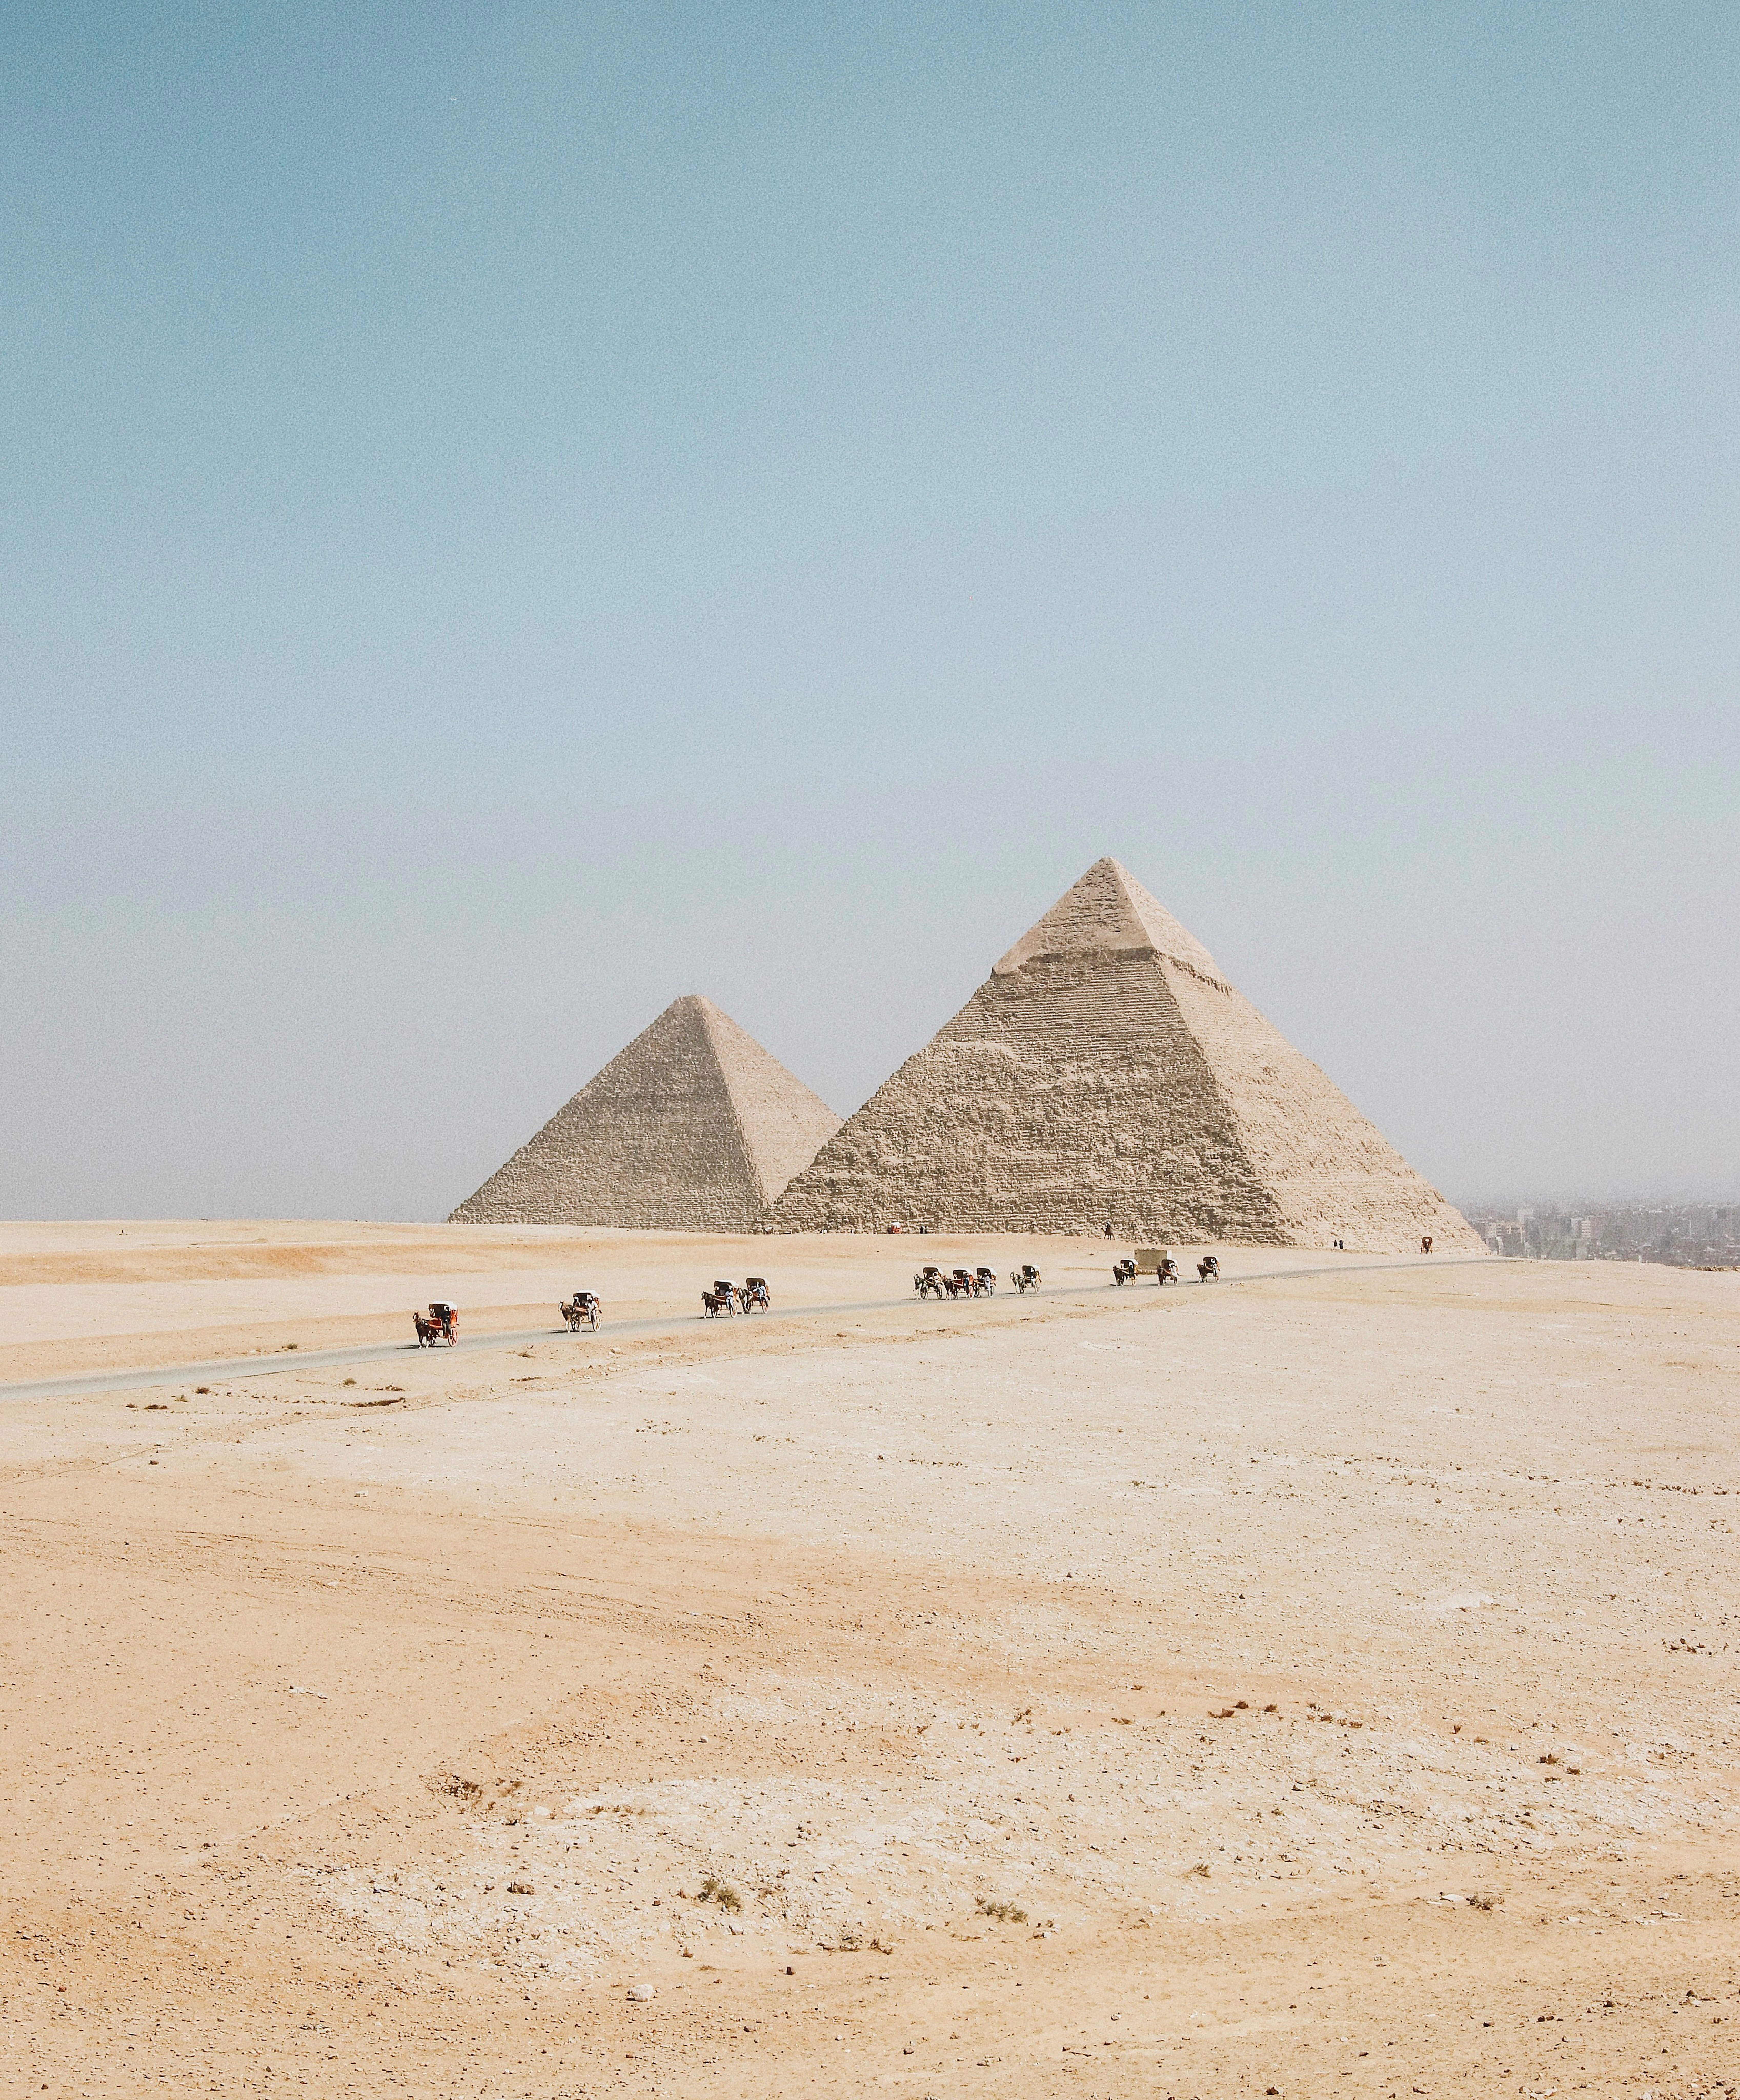 Pyramids in Egypt representing The Top Five Things You Didn't Know About Past Lives